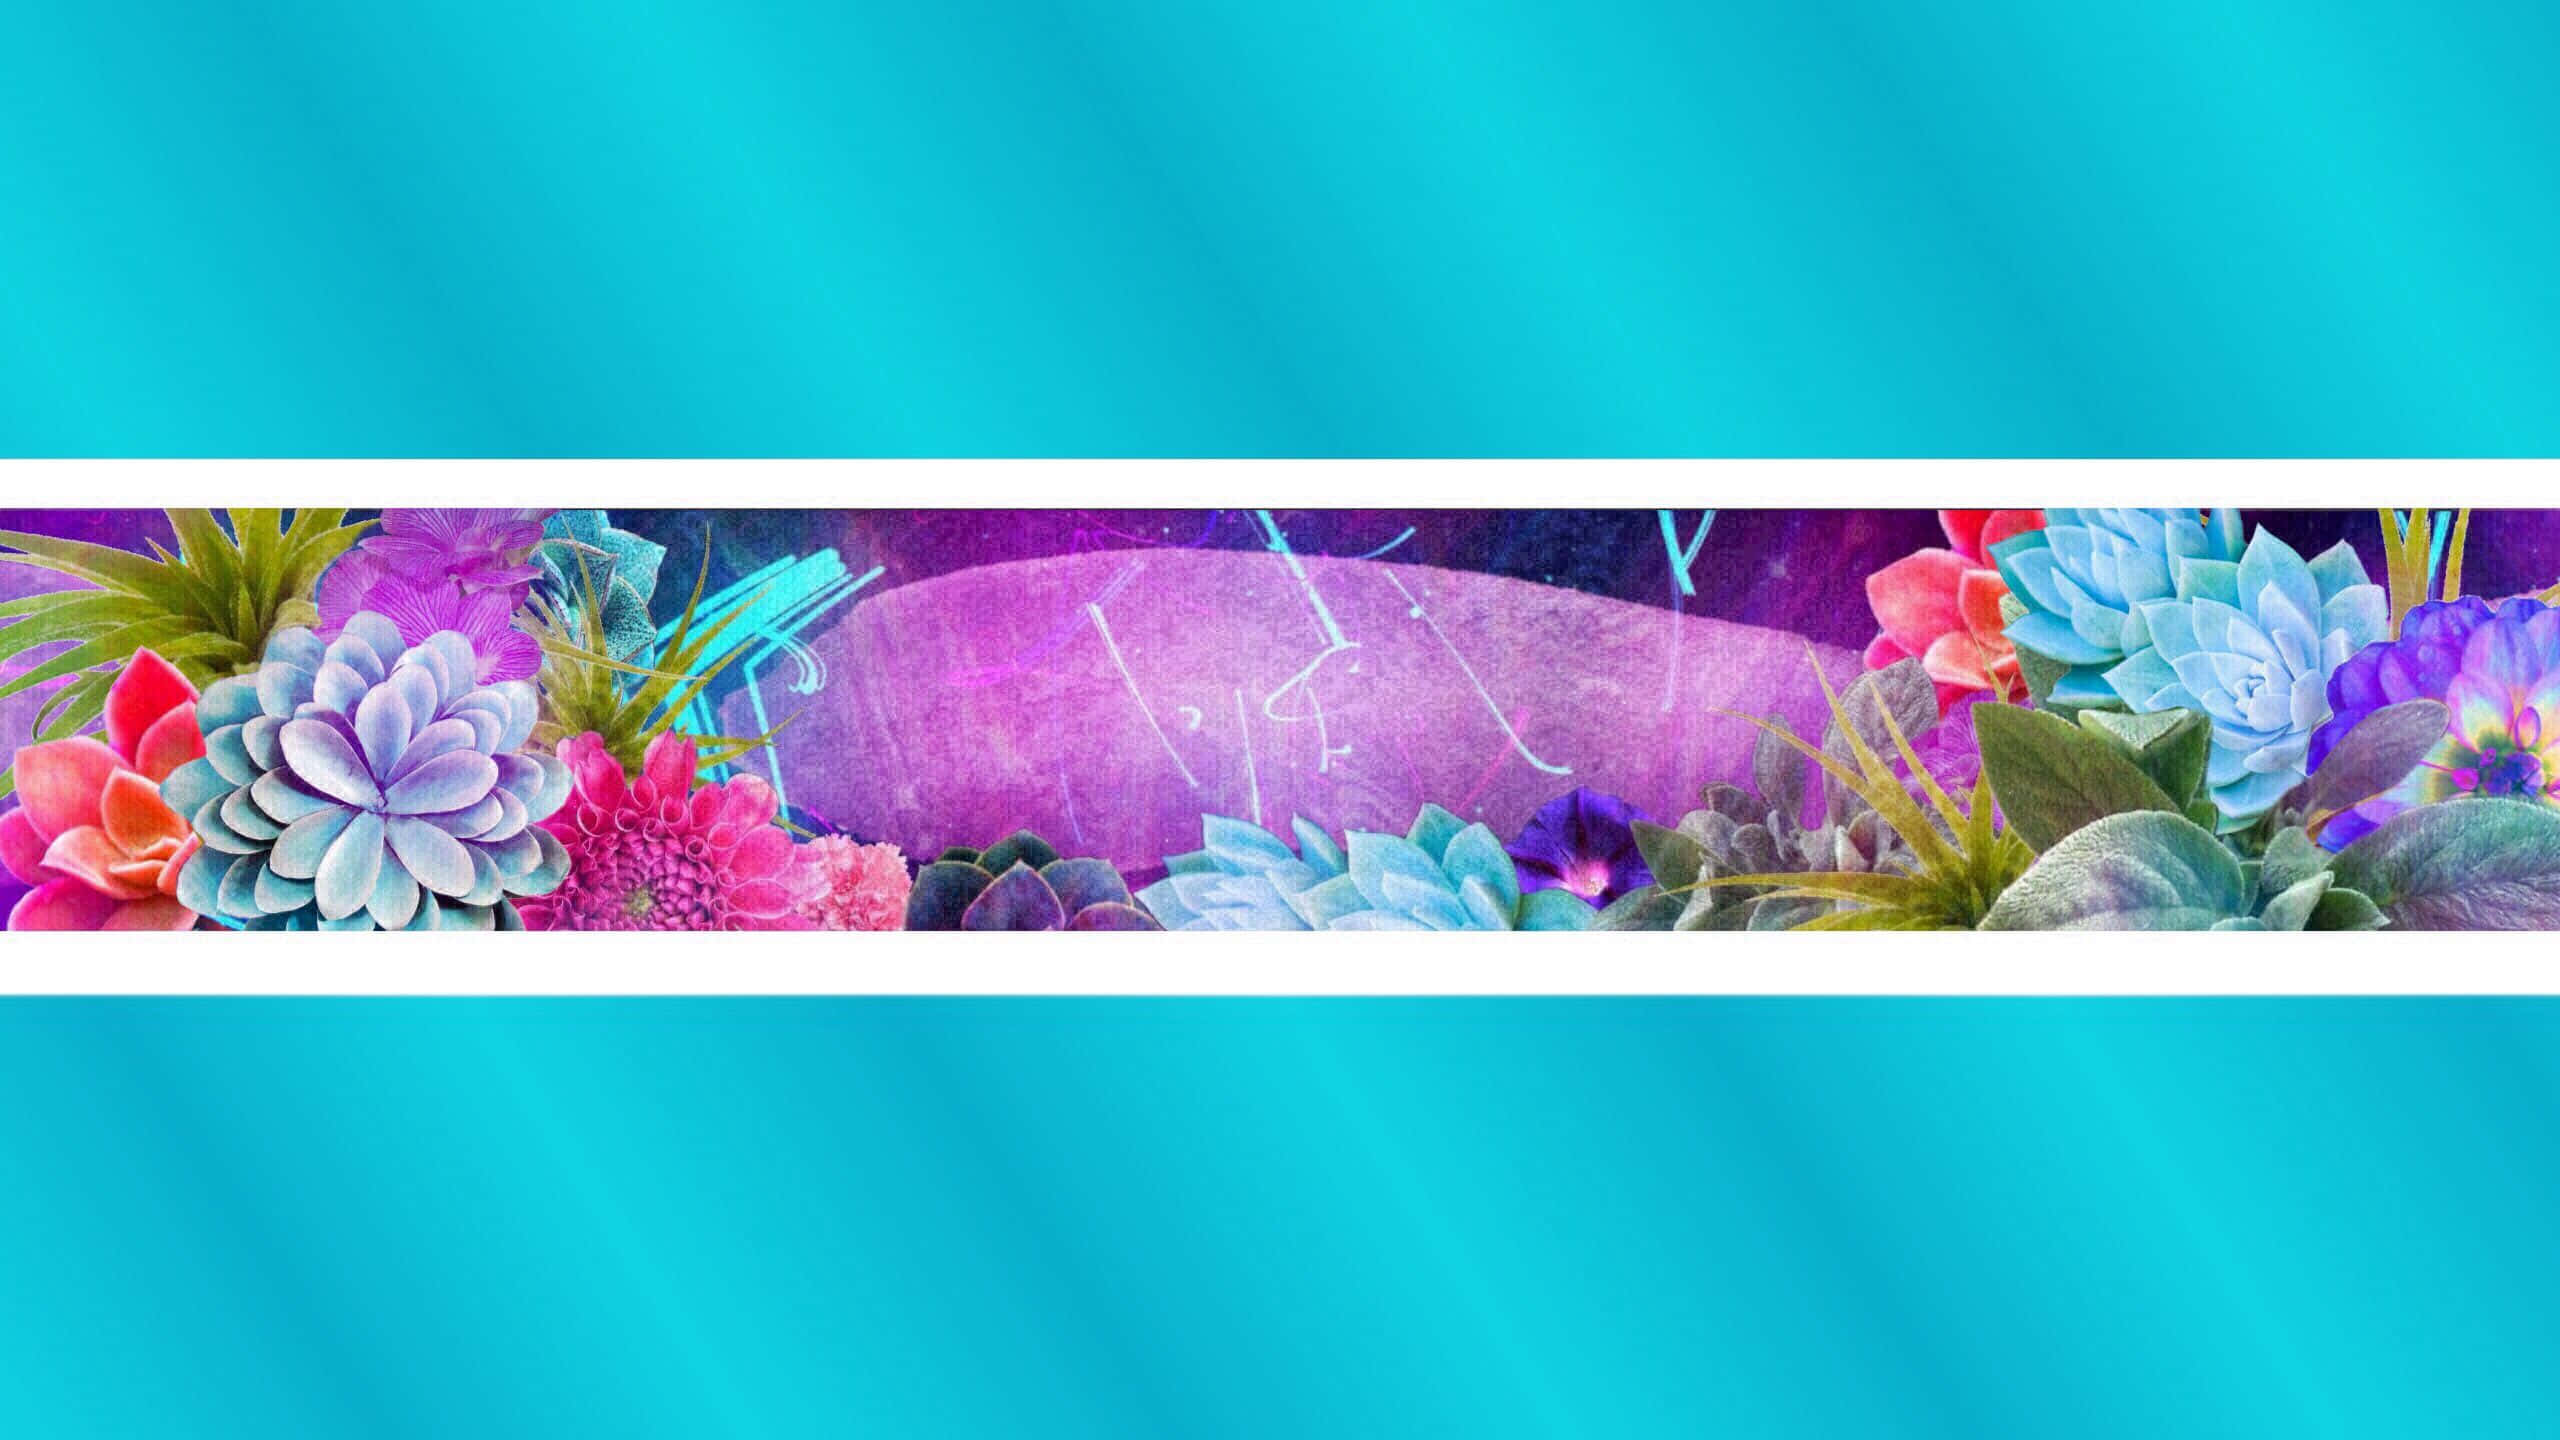 Download Aesthetic Youtube Banner Background 2560 X 1440 | Wallpapers.com